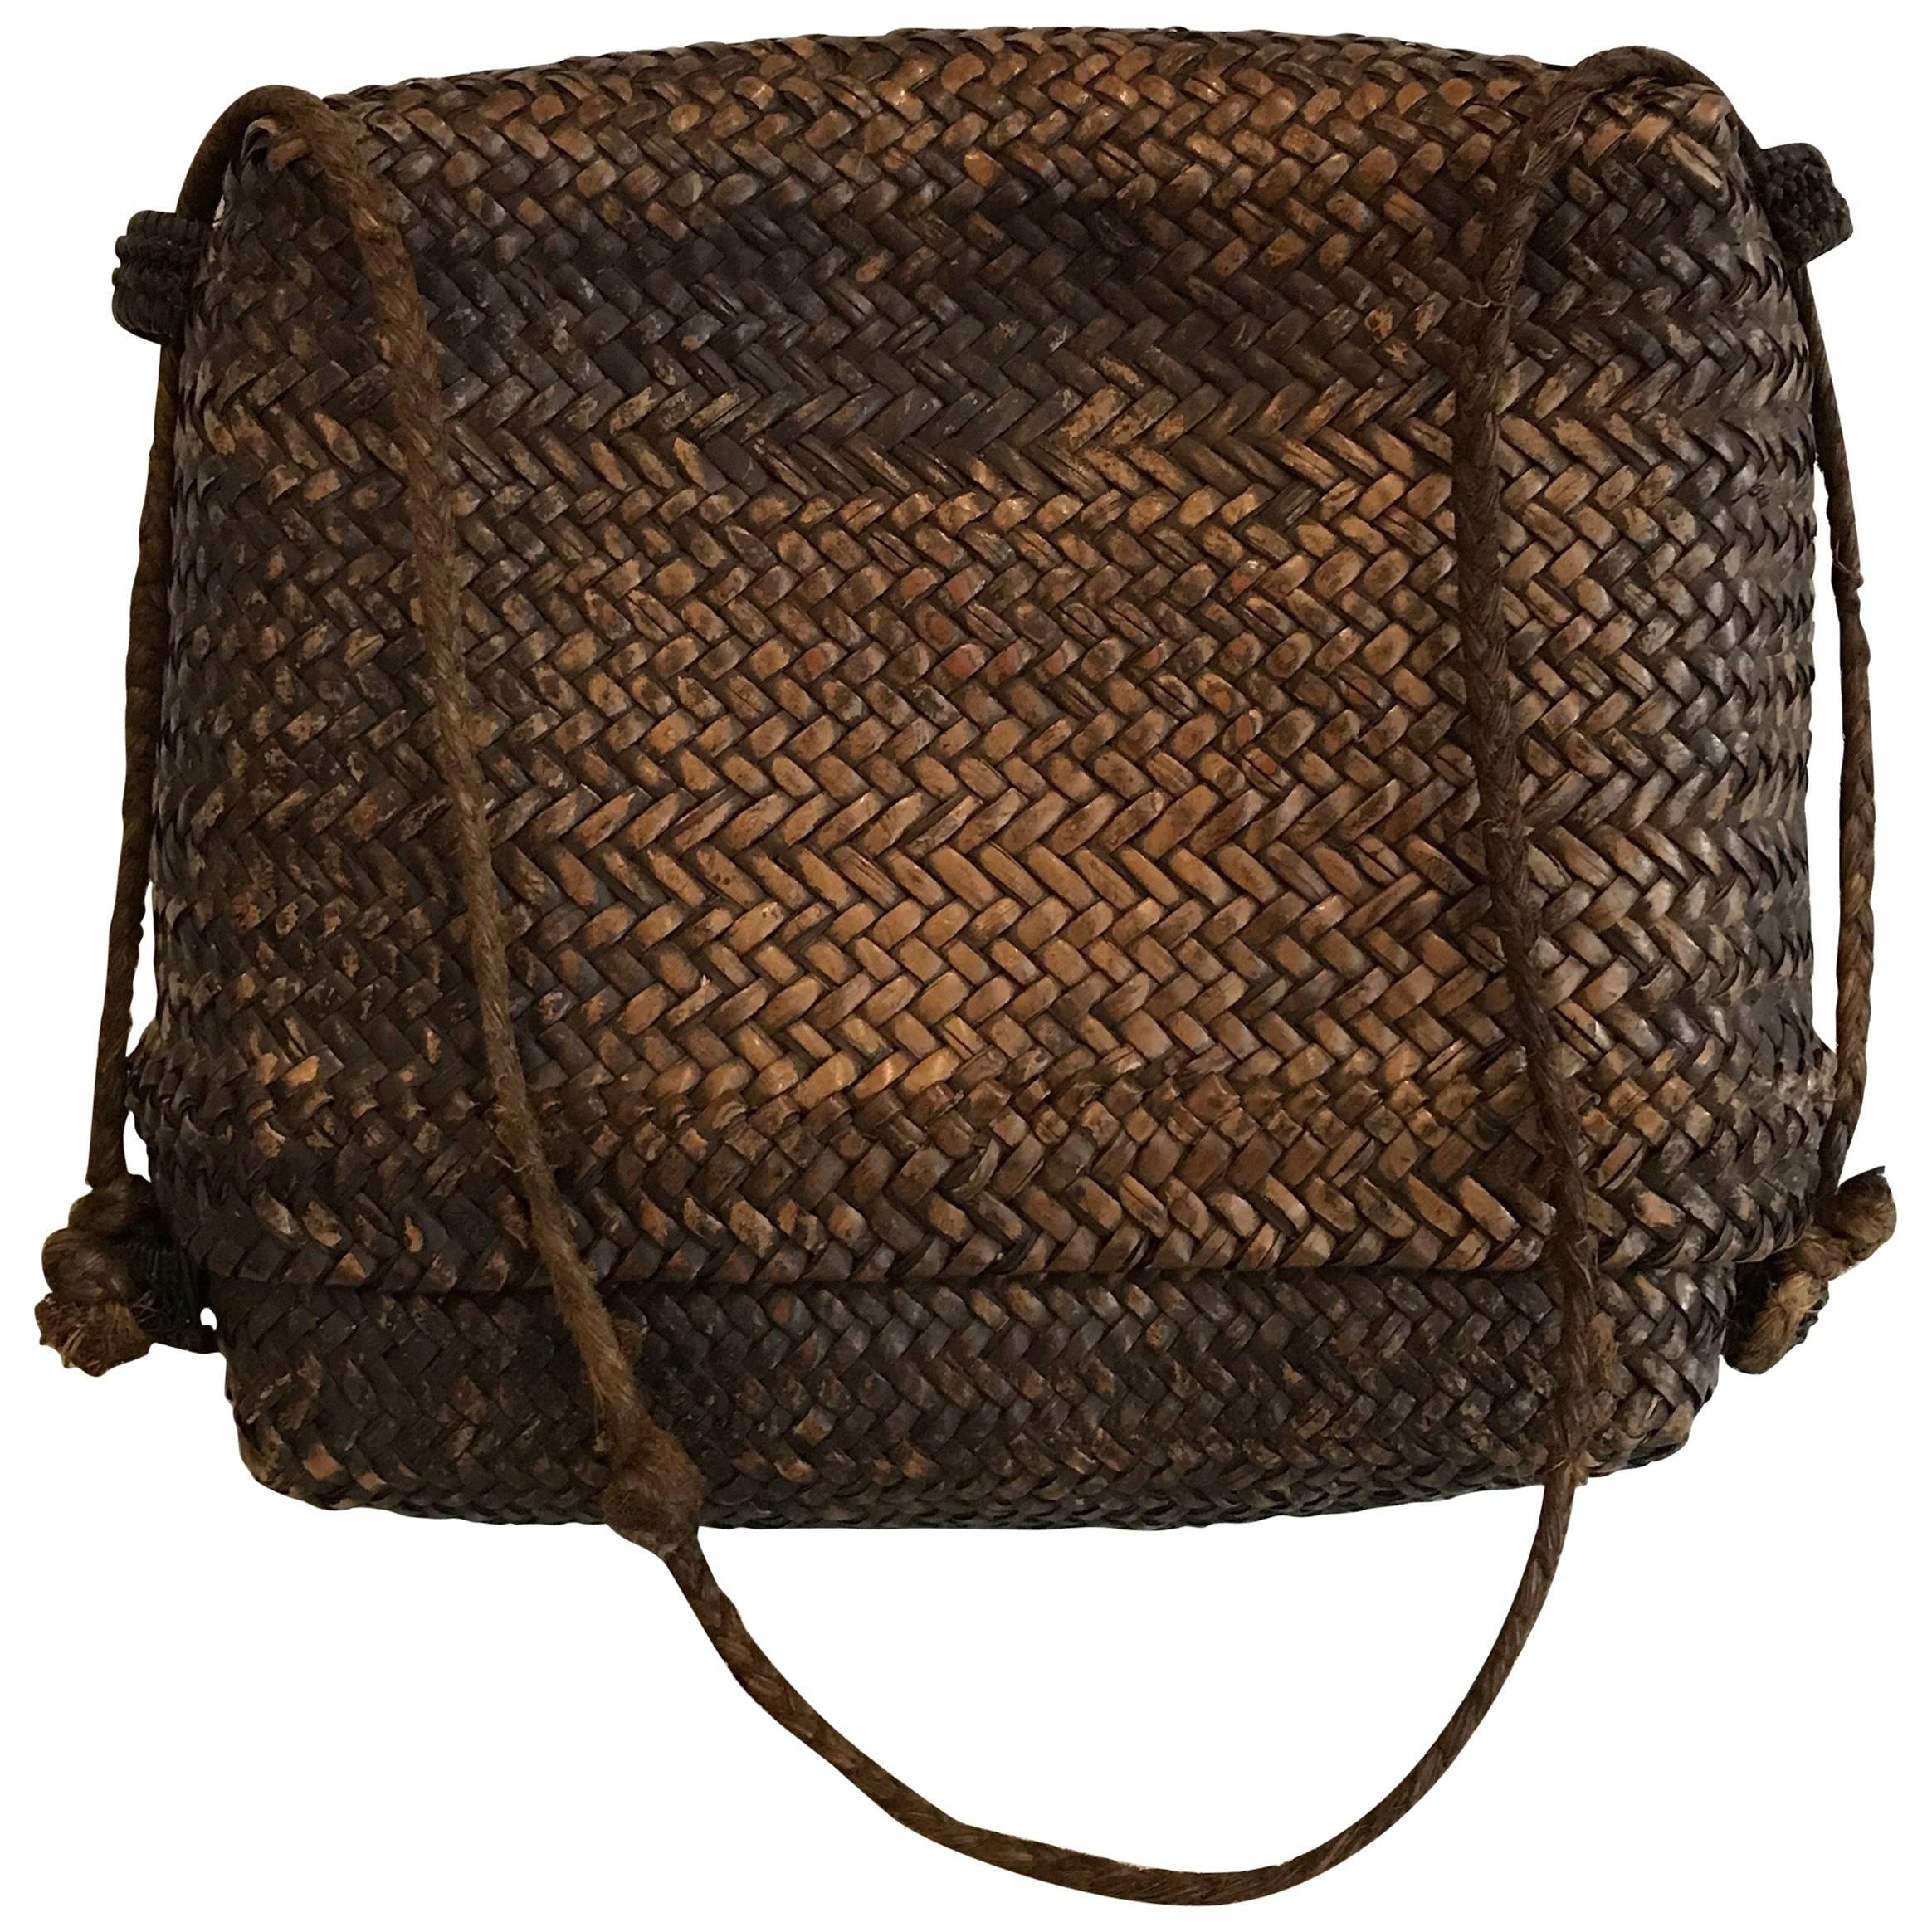 Early 20th Century Woven Thai Basket For Sale